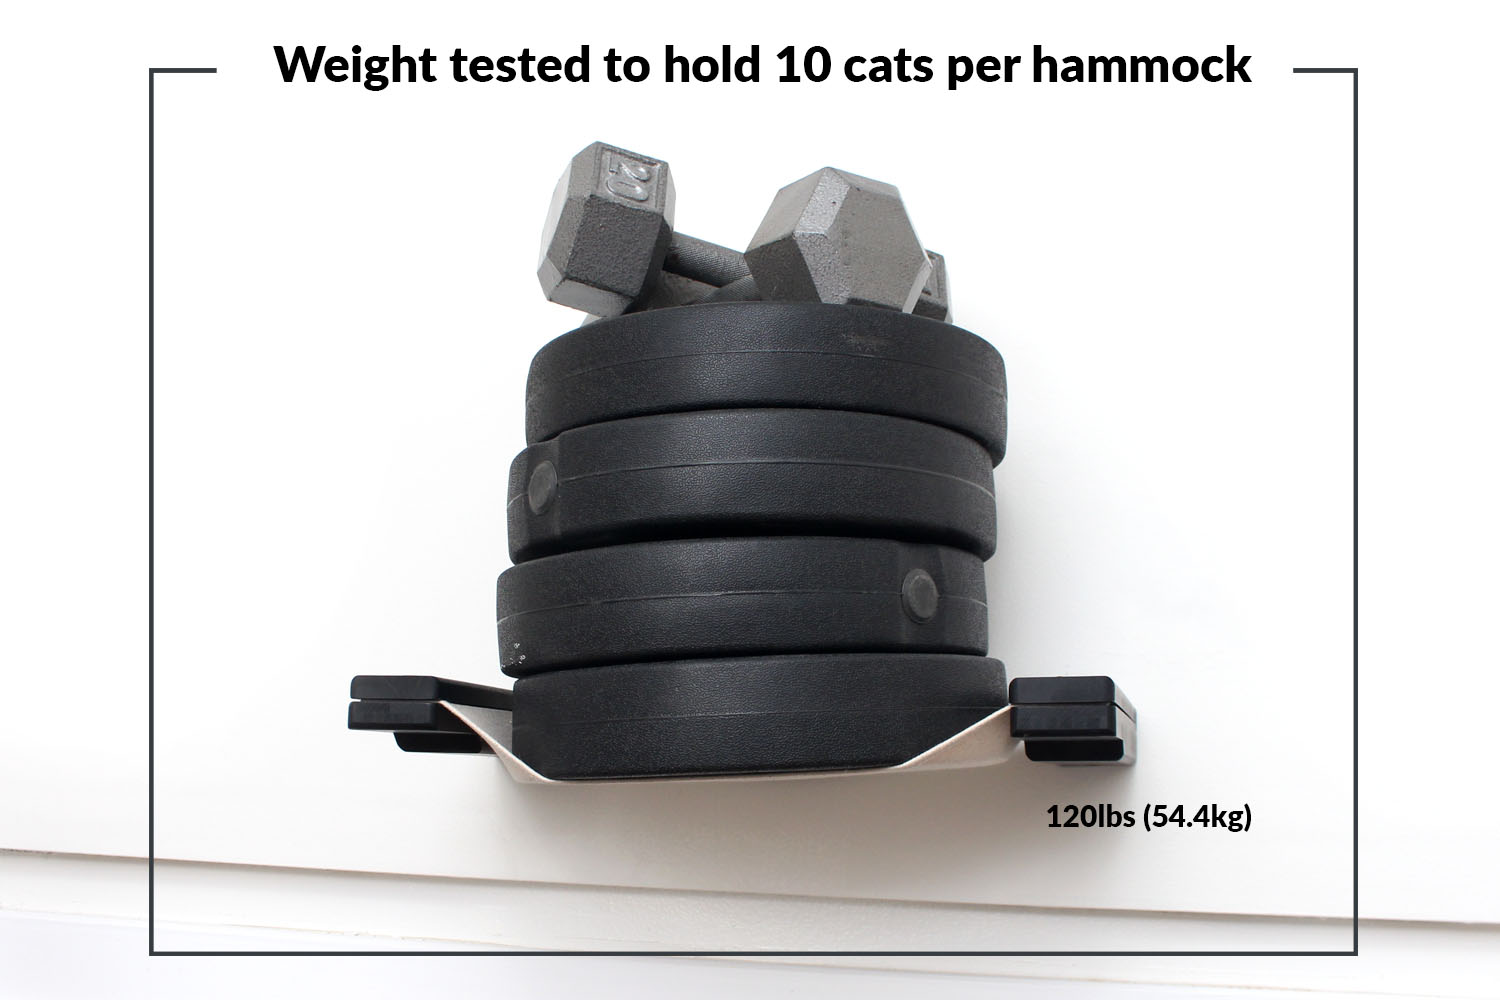 weight test with weights on hammock